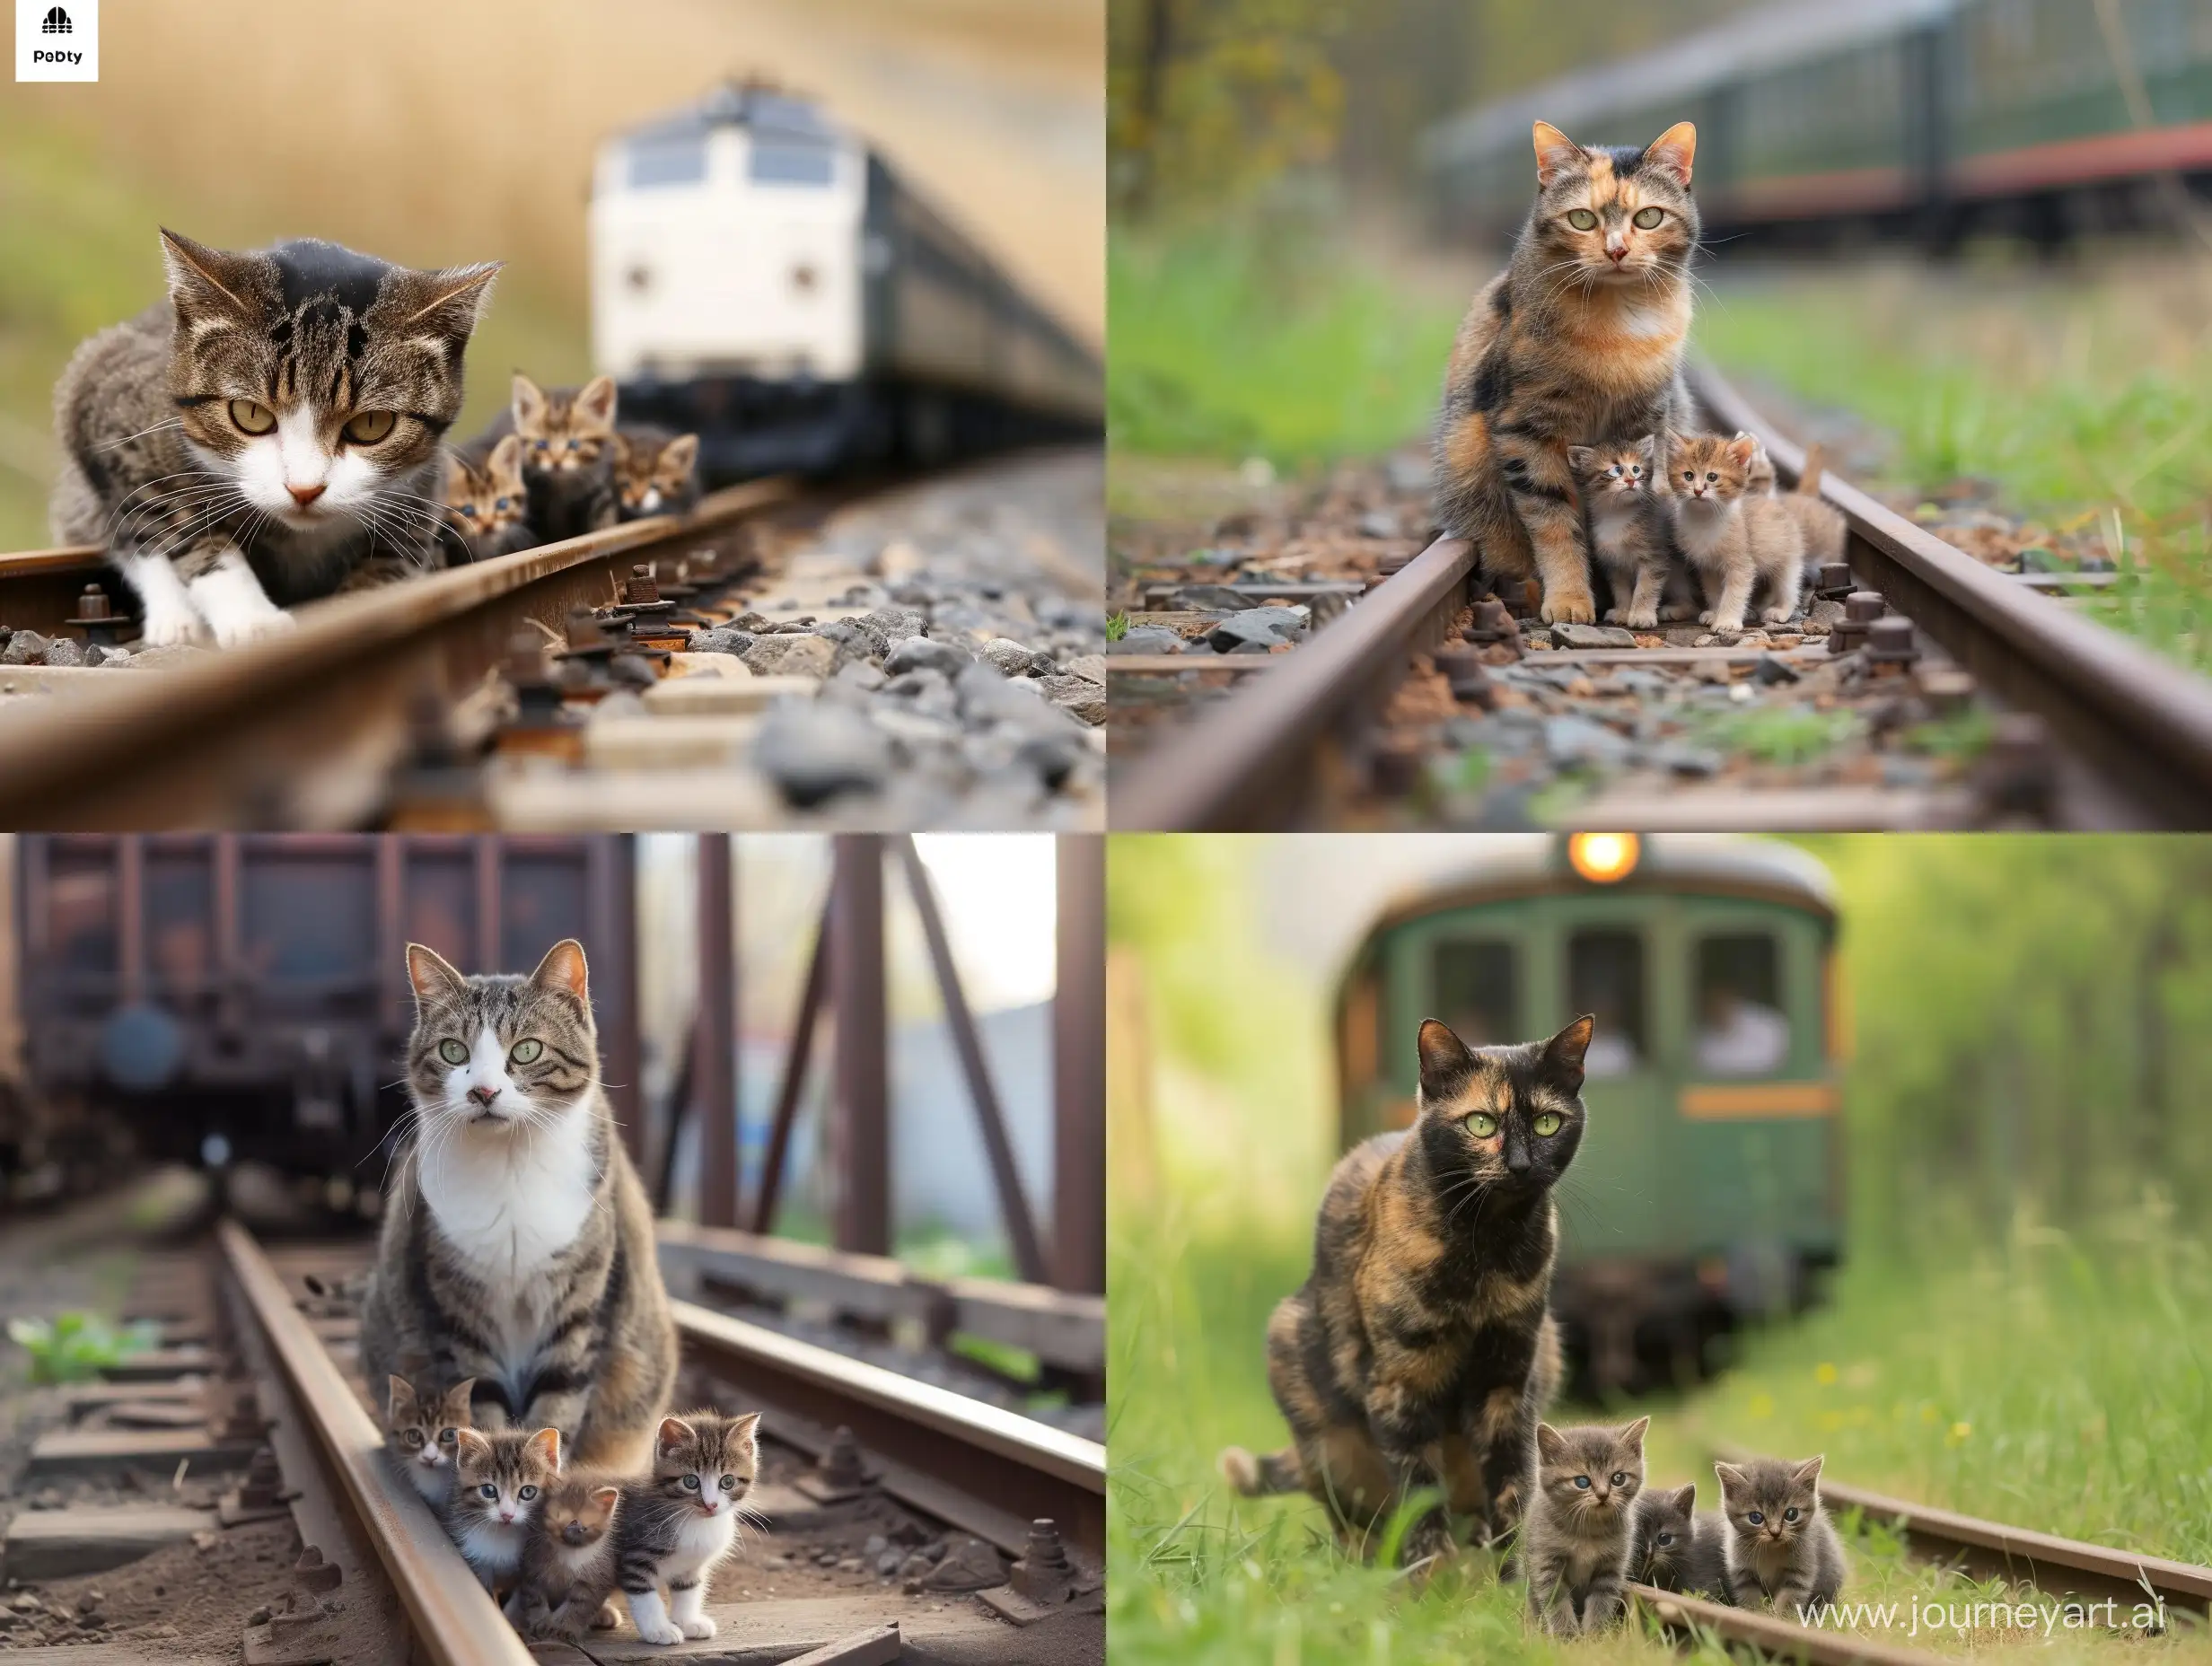 Train-Collides-with-Cat-and-Kittens-on-Tracks